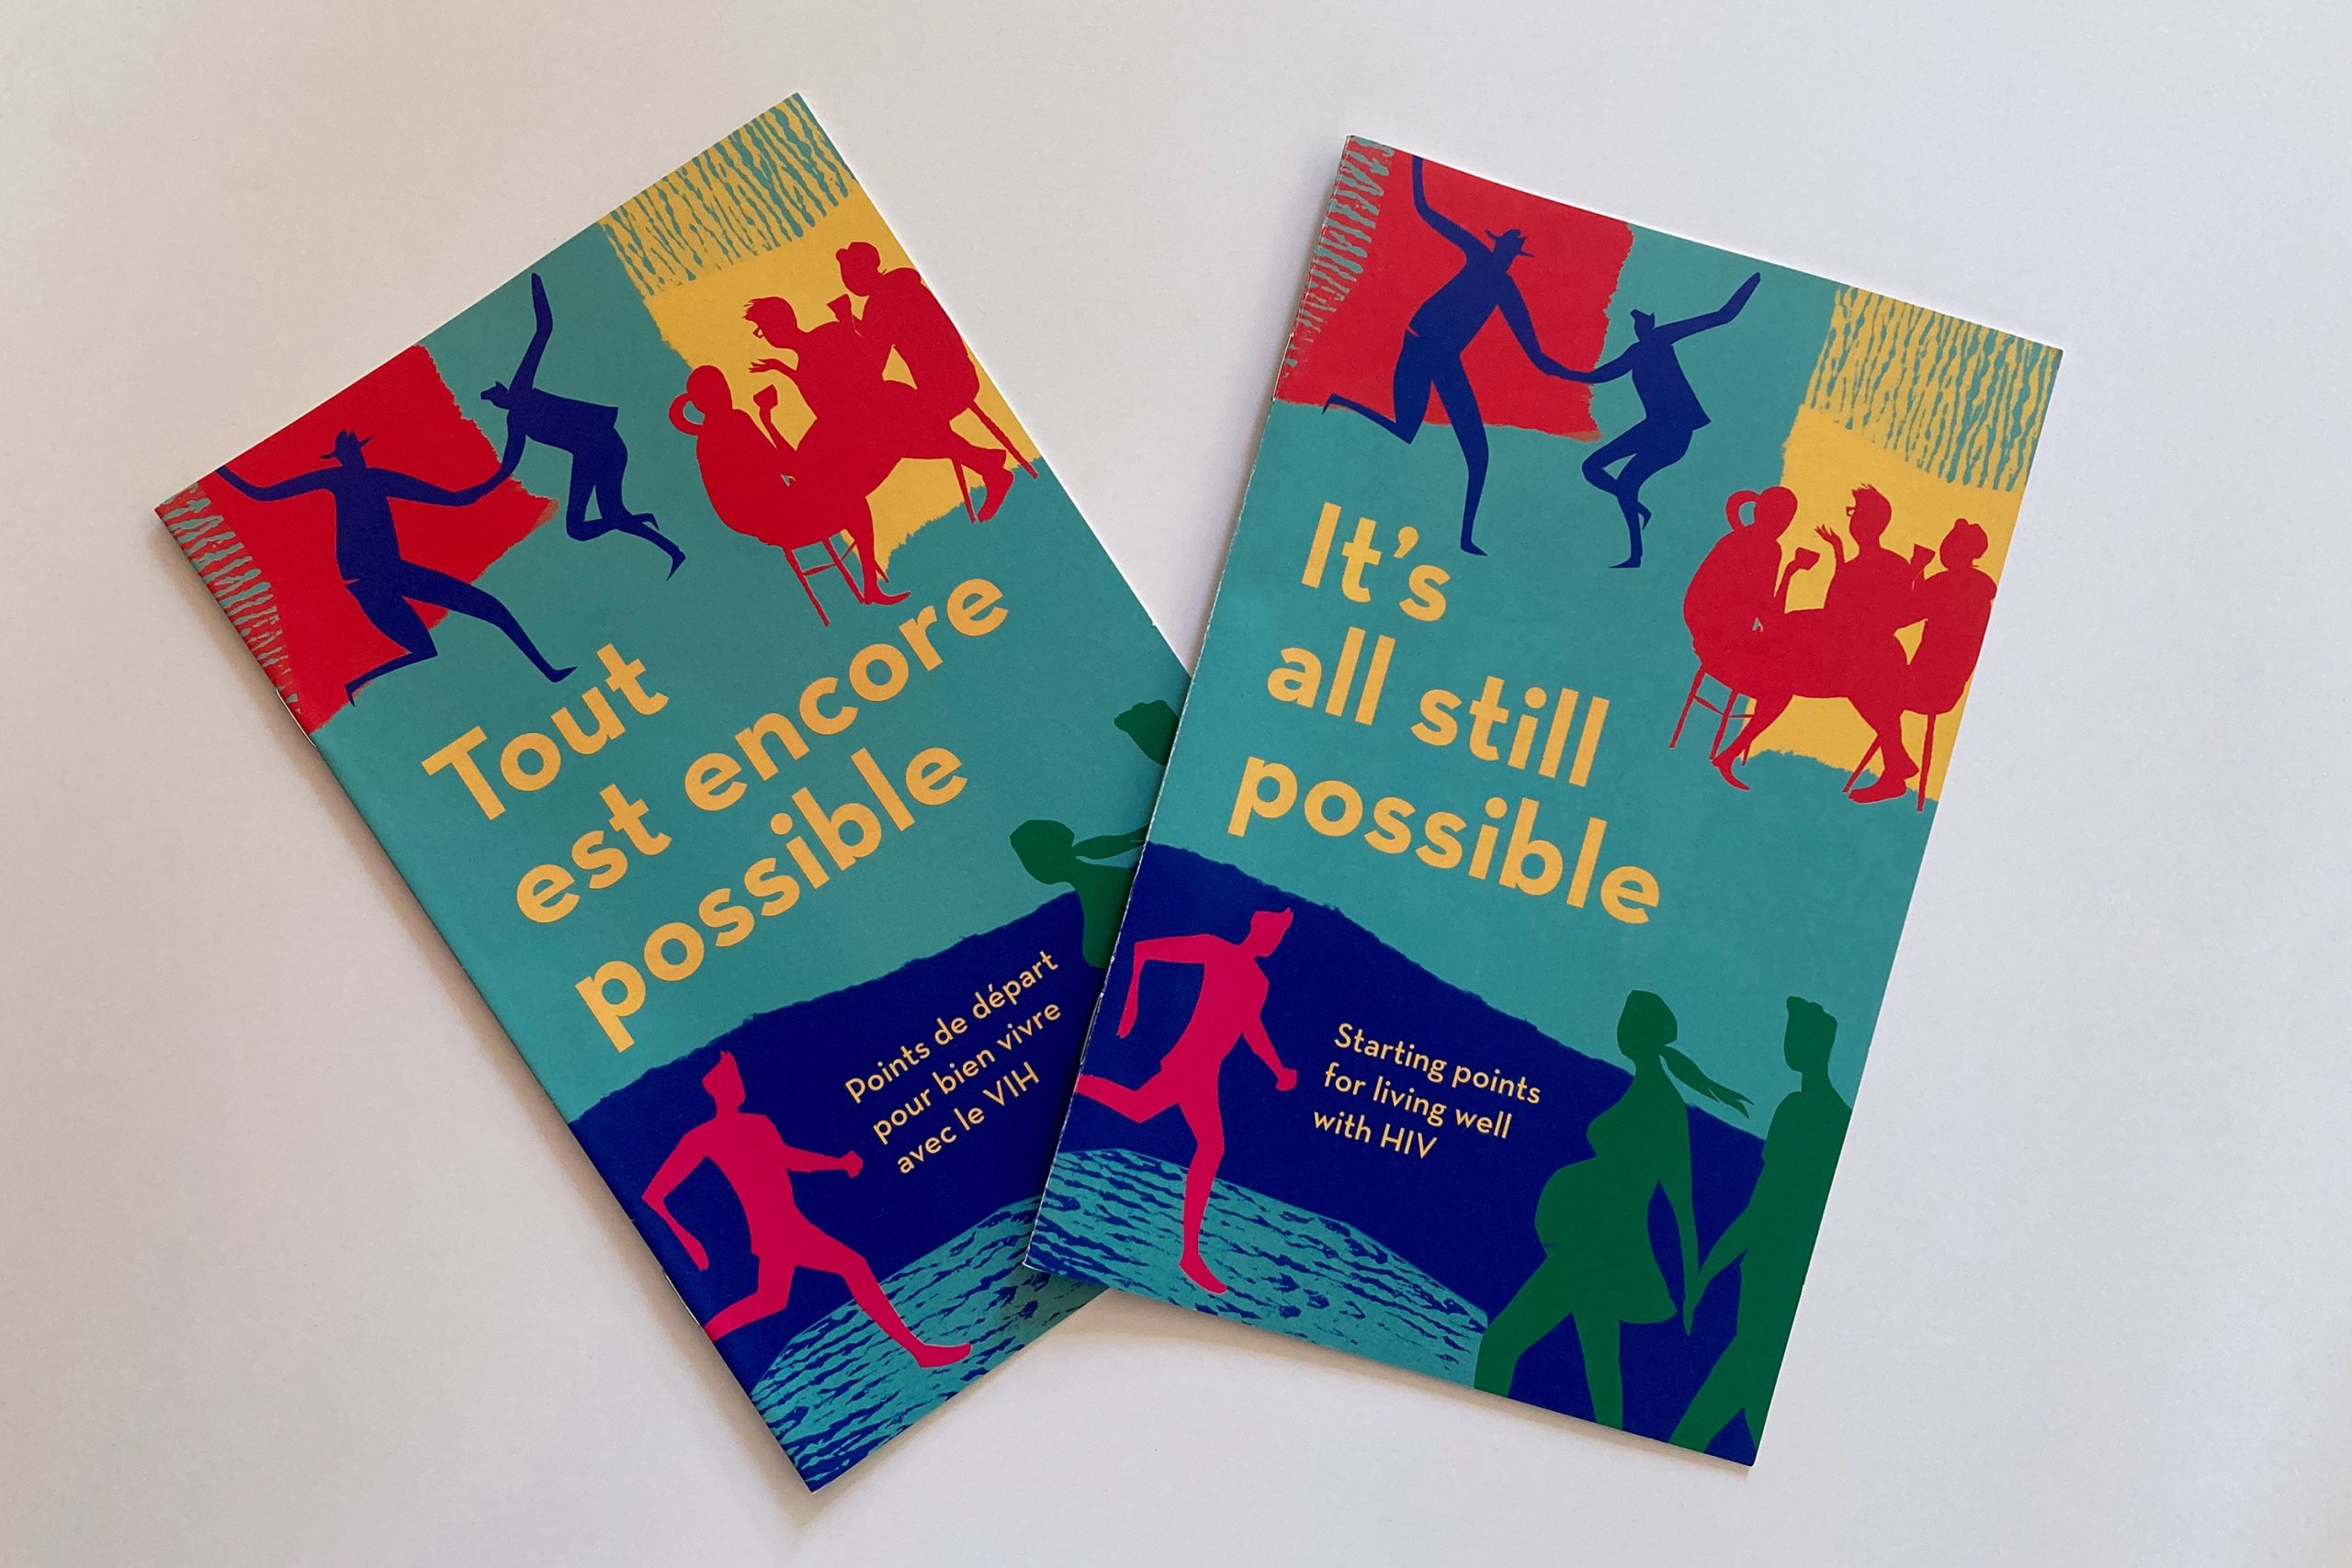 Covers of the French and English versions of the booklet. The English title is "It's all still possible" and the French title is "Tout est encore possible."